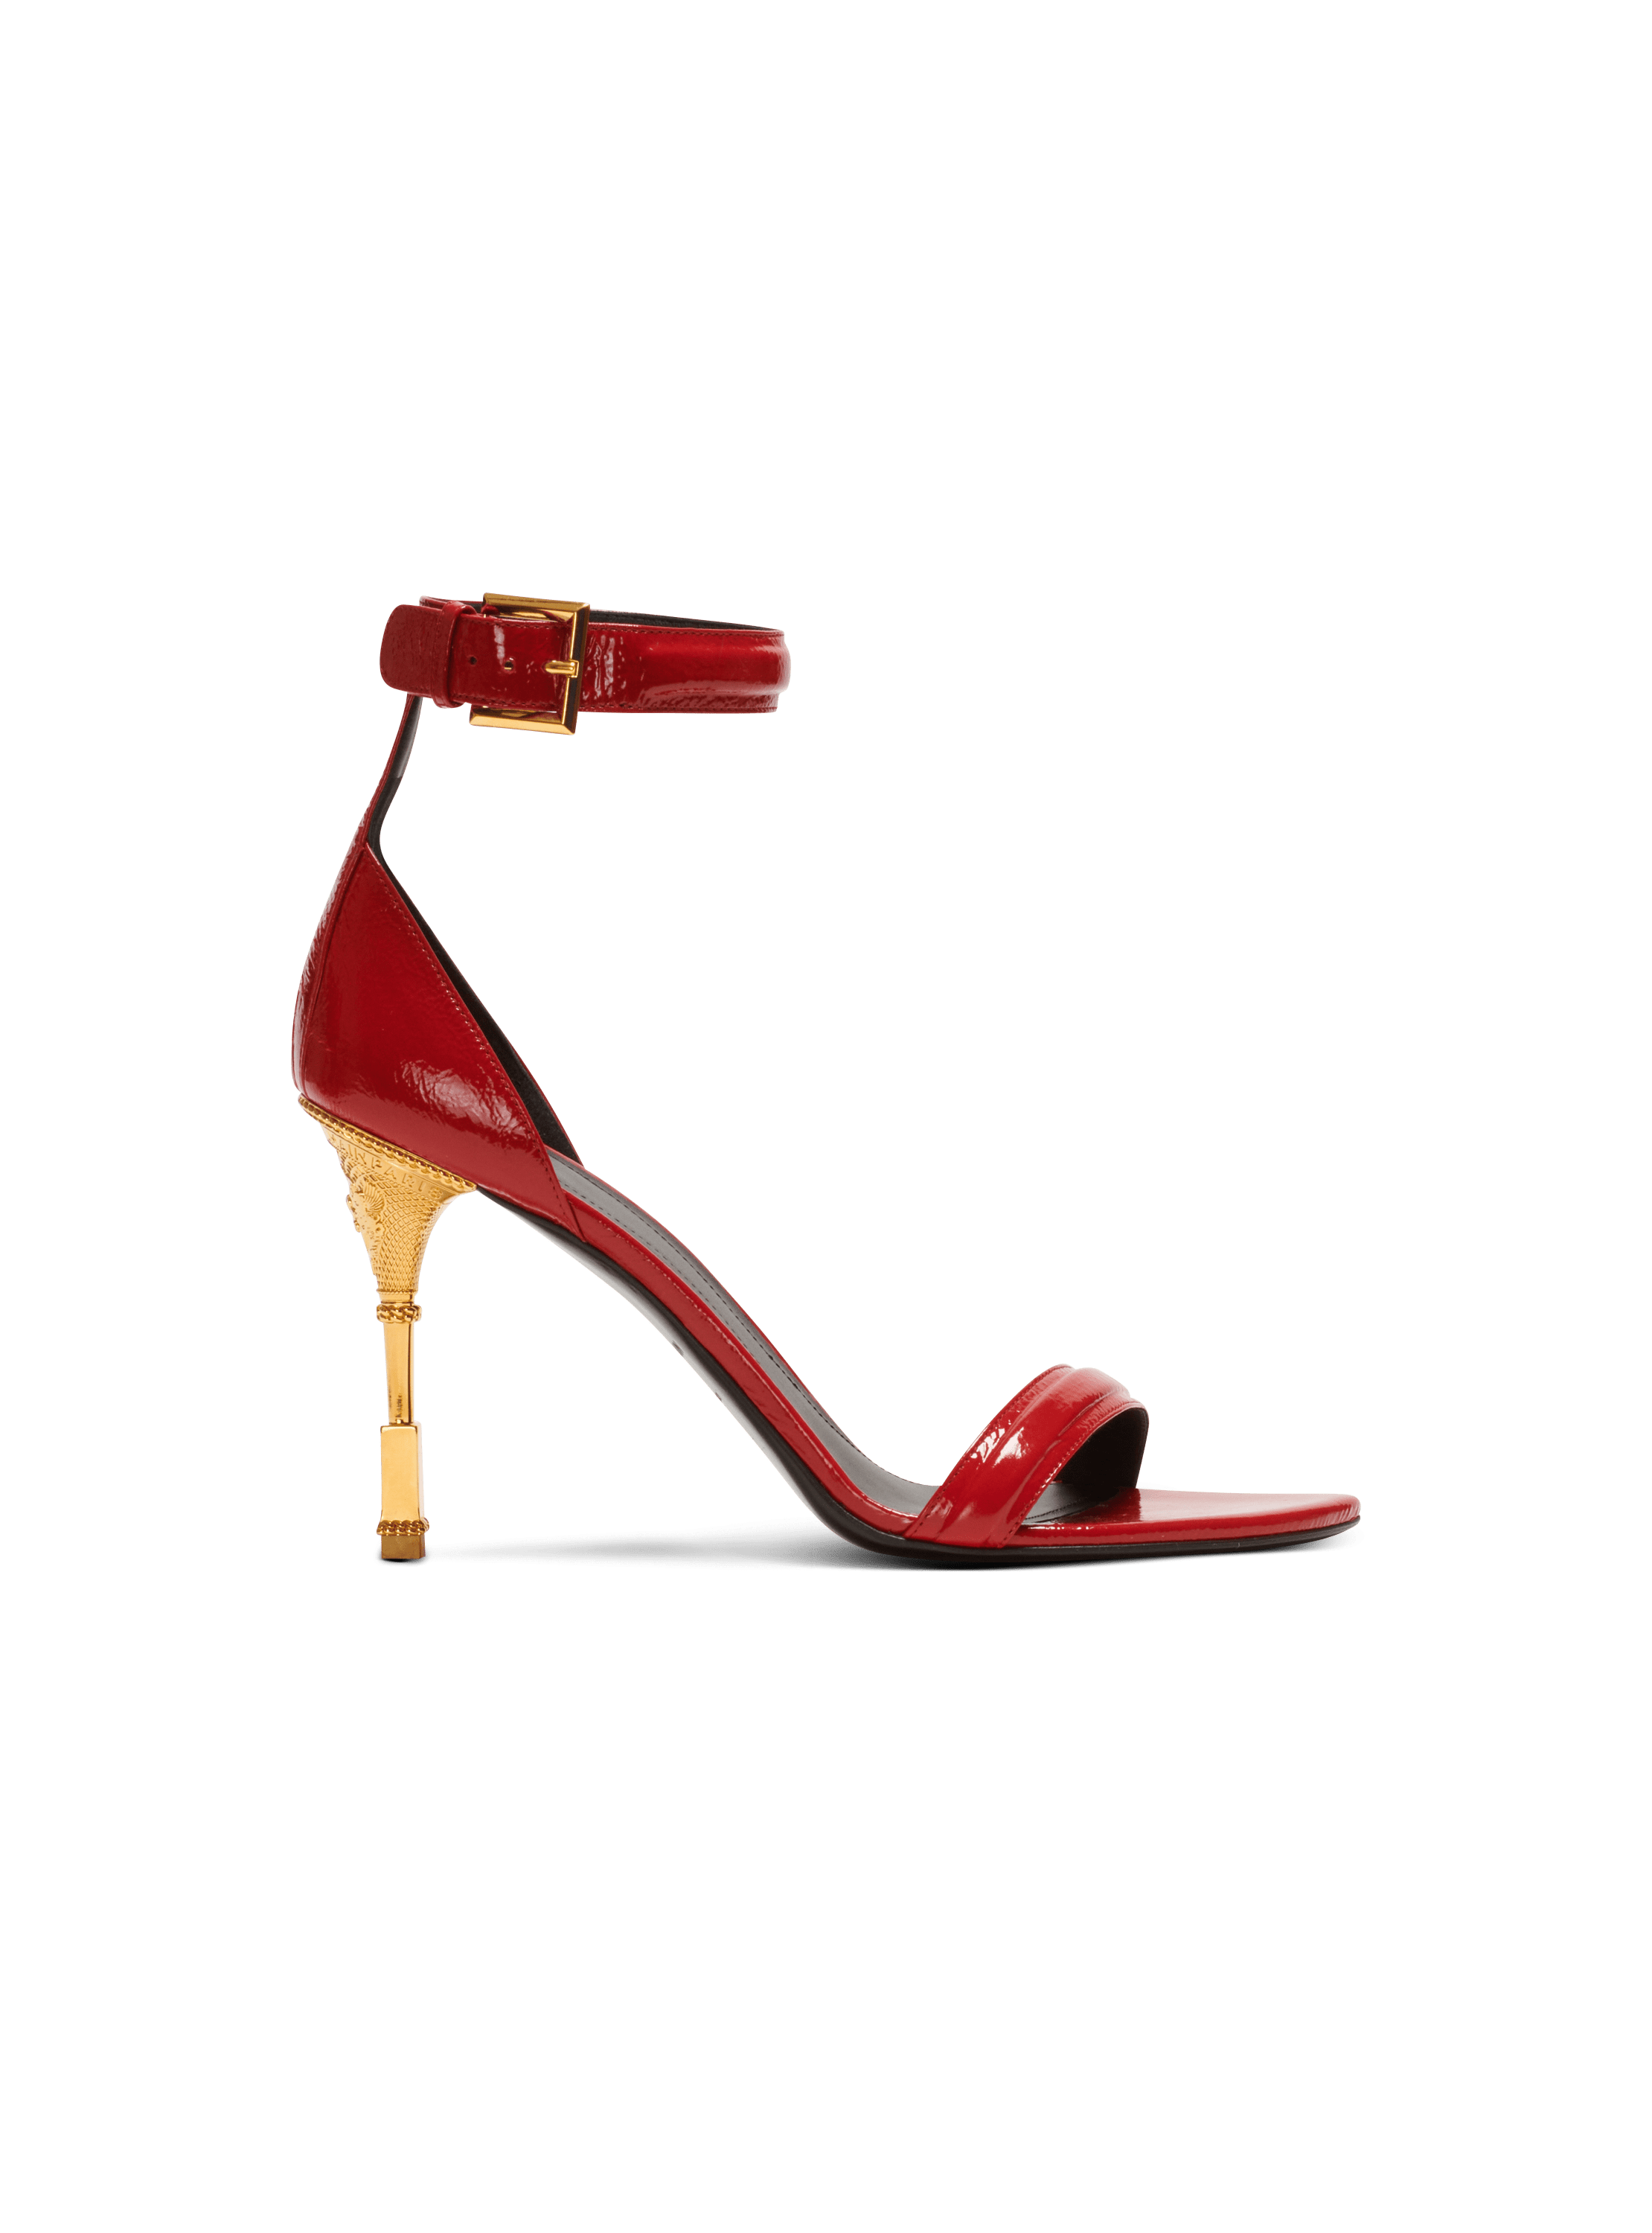 Louis Vuitton Red Patent Leather Peep Toe Sandals Size 39 For Sale